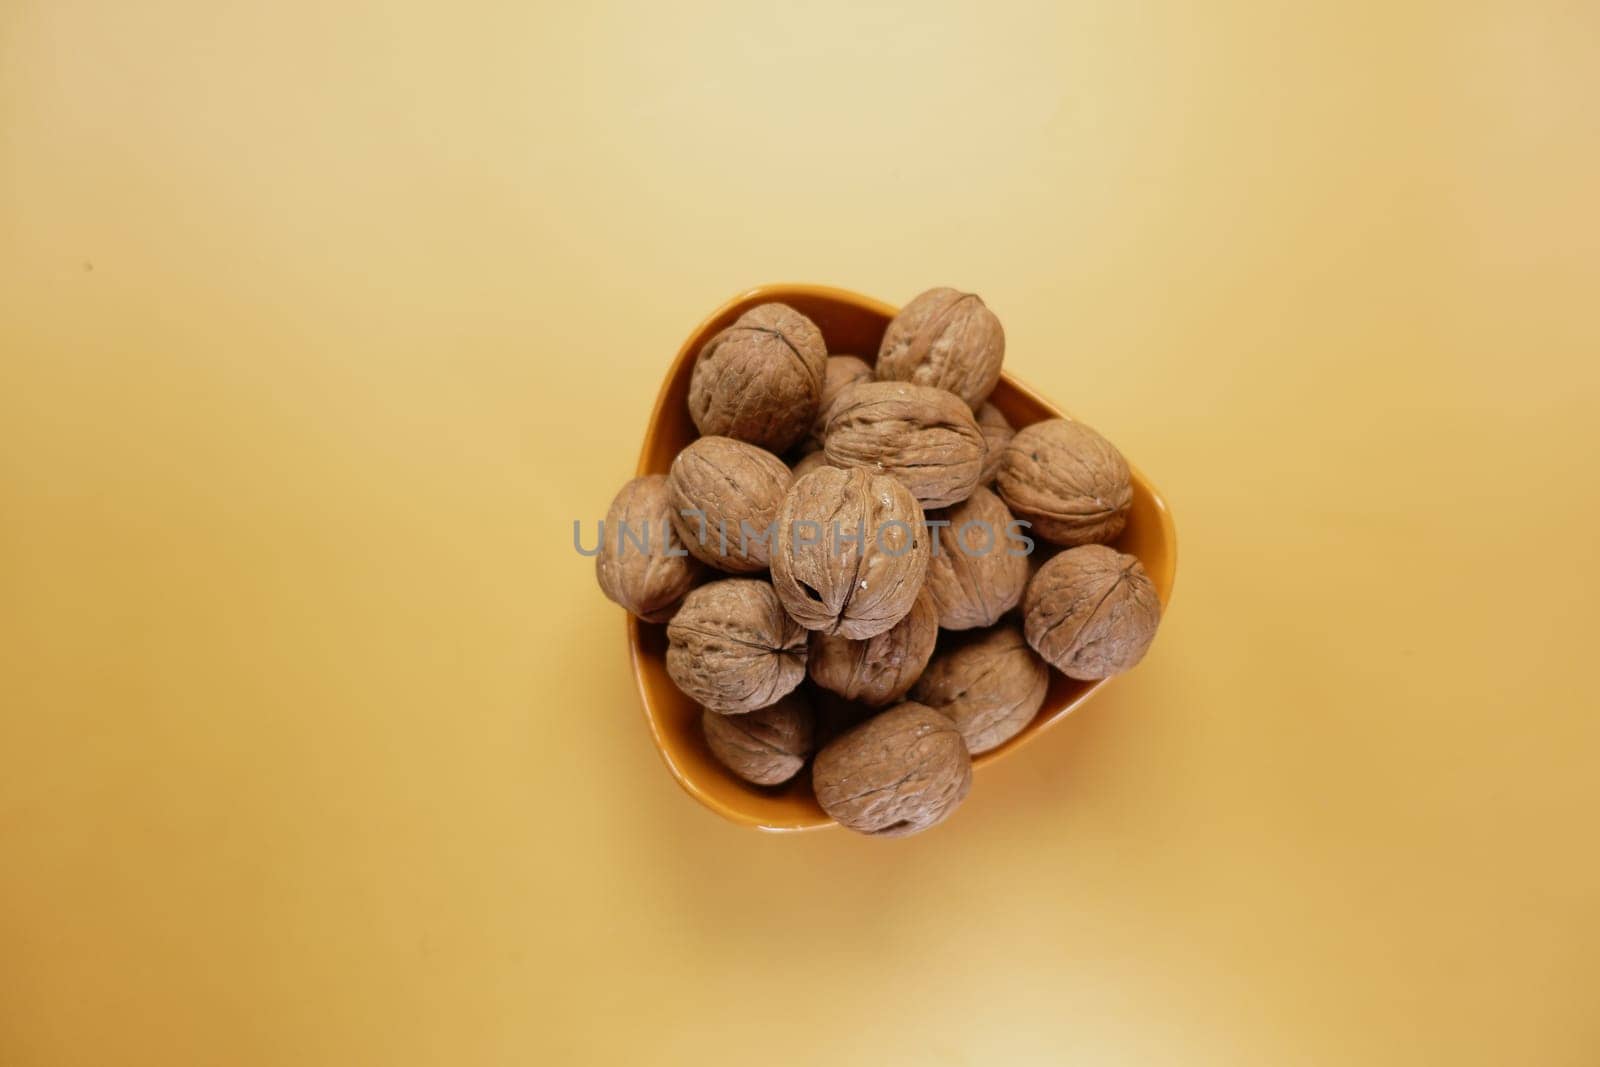 stack of natural walnuts in a bowl on orange color background by towfiq007